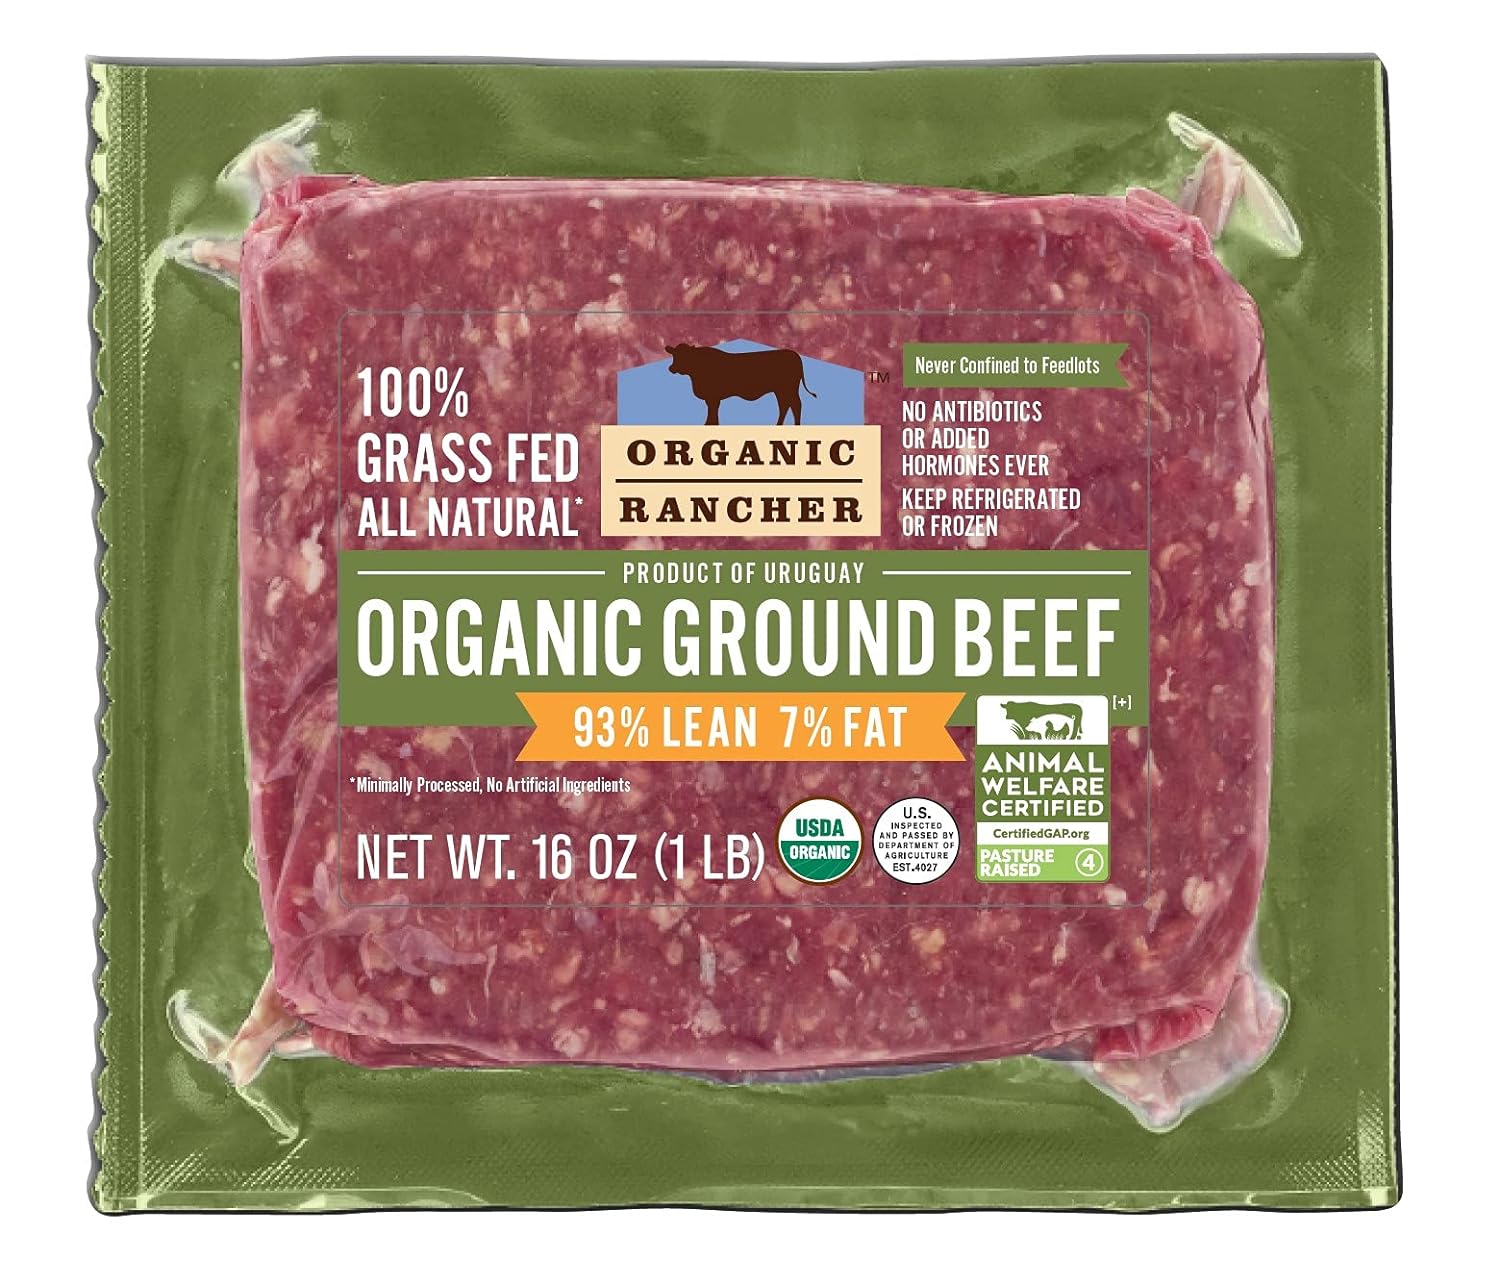 Organic Rancher Ground Beef Review